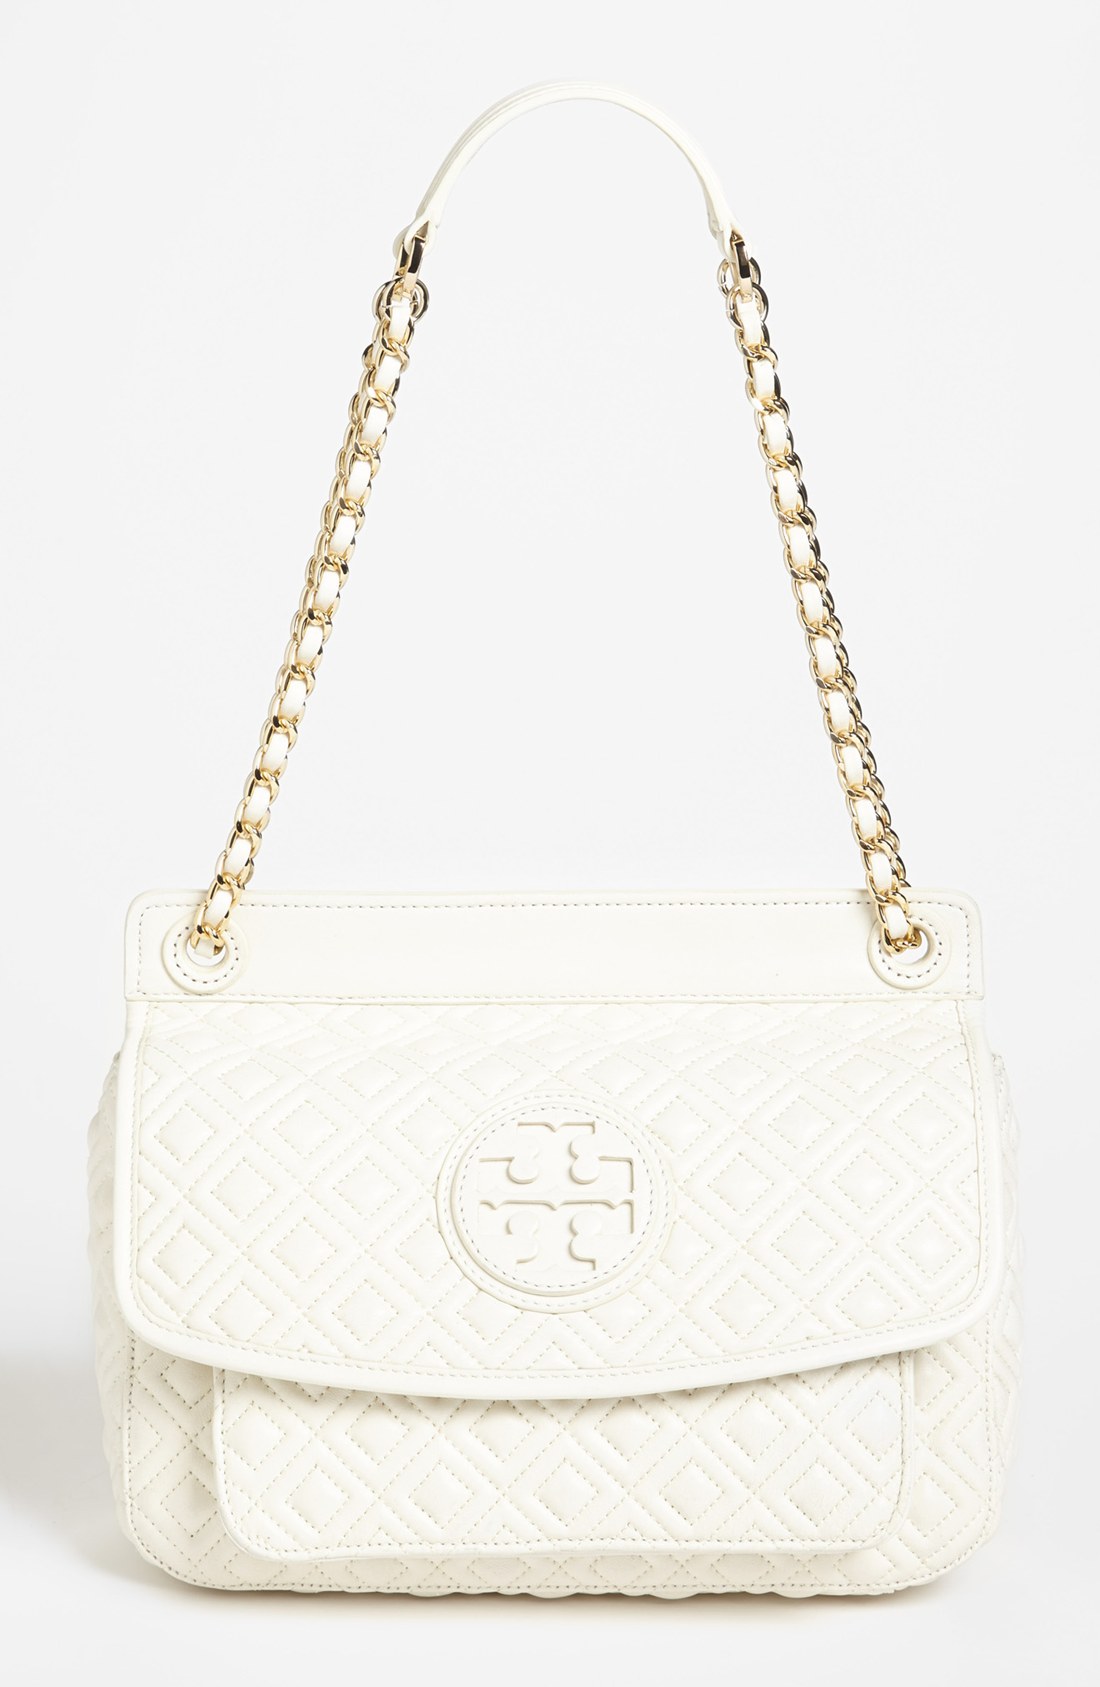 Tory Burch Marion Small Shoulder Bag in White | Lyst